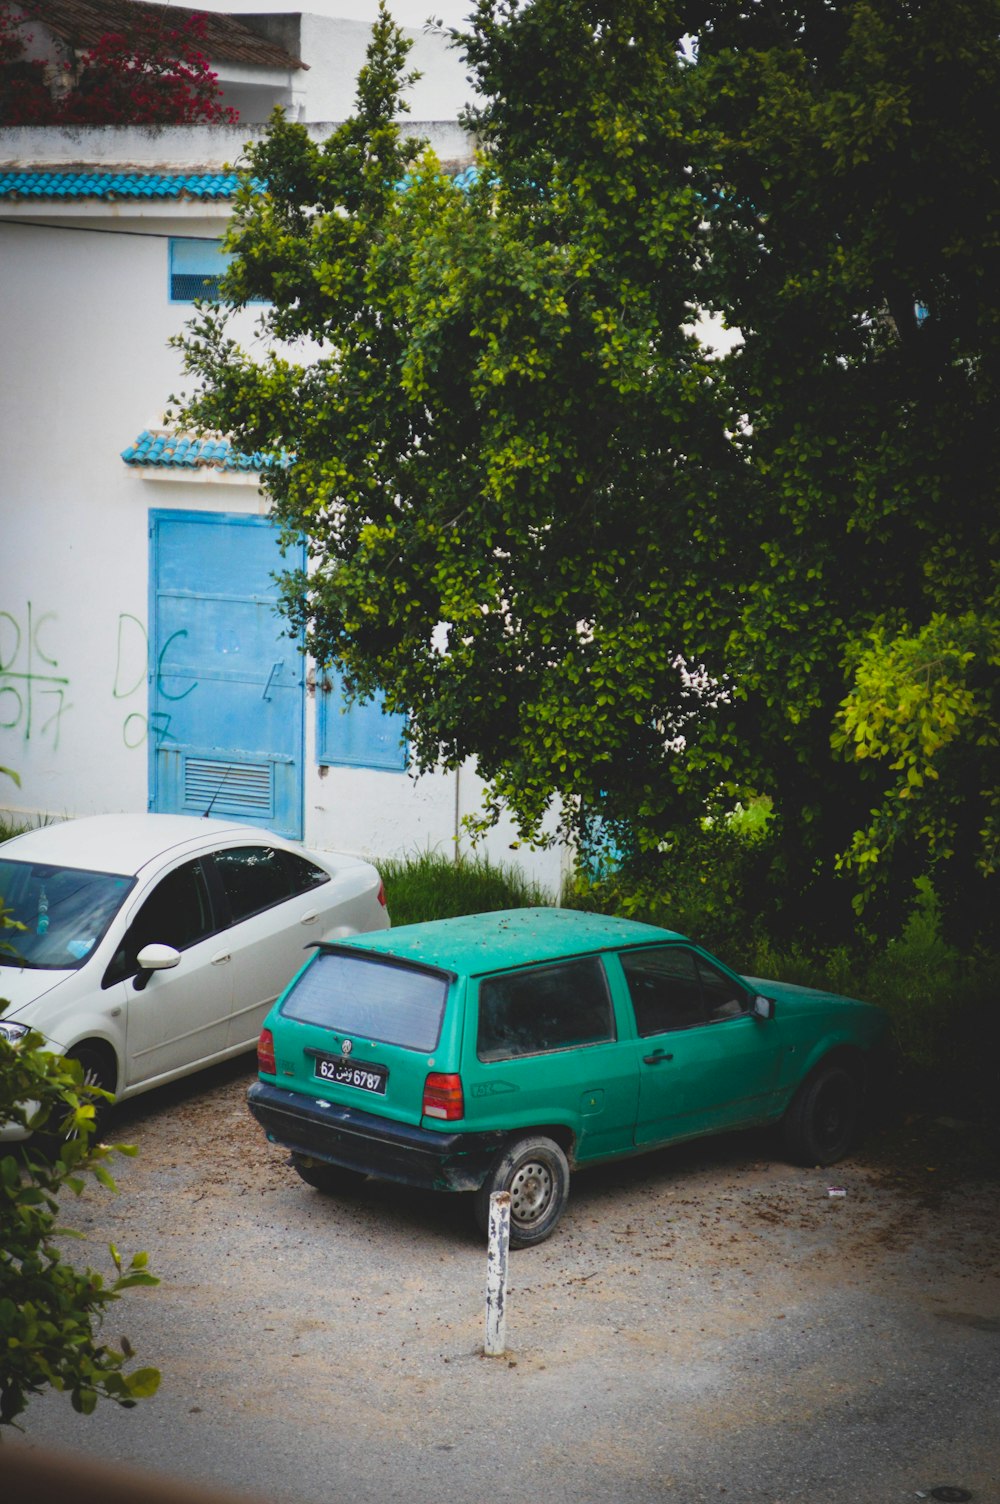 two cars parked in front of a white building